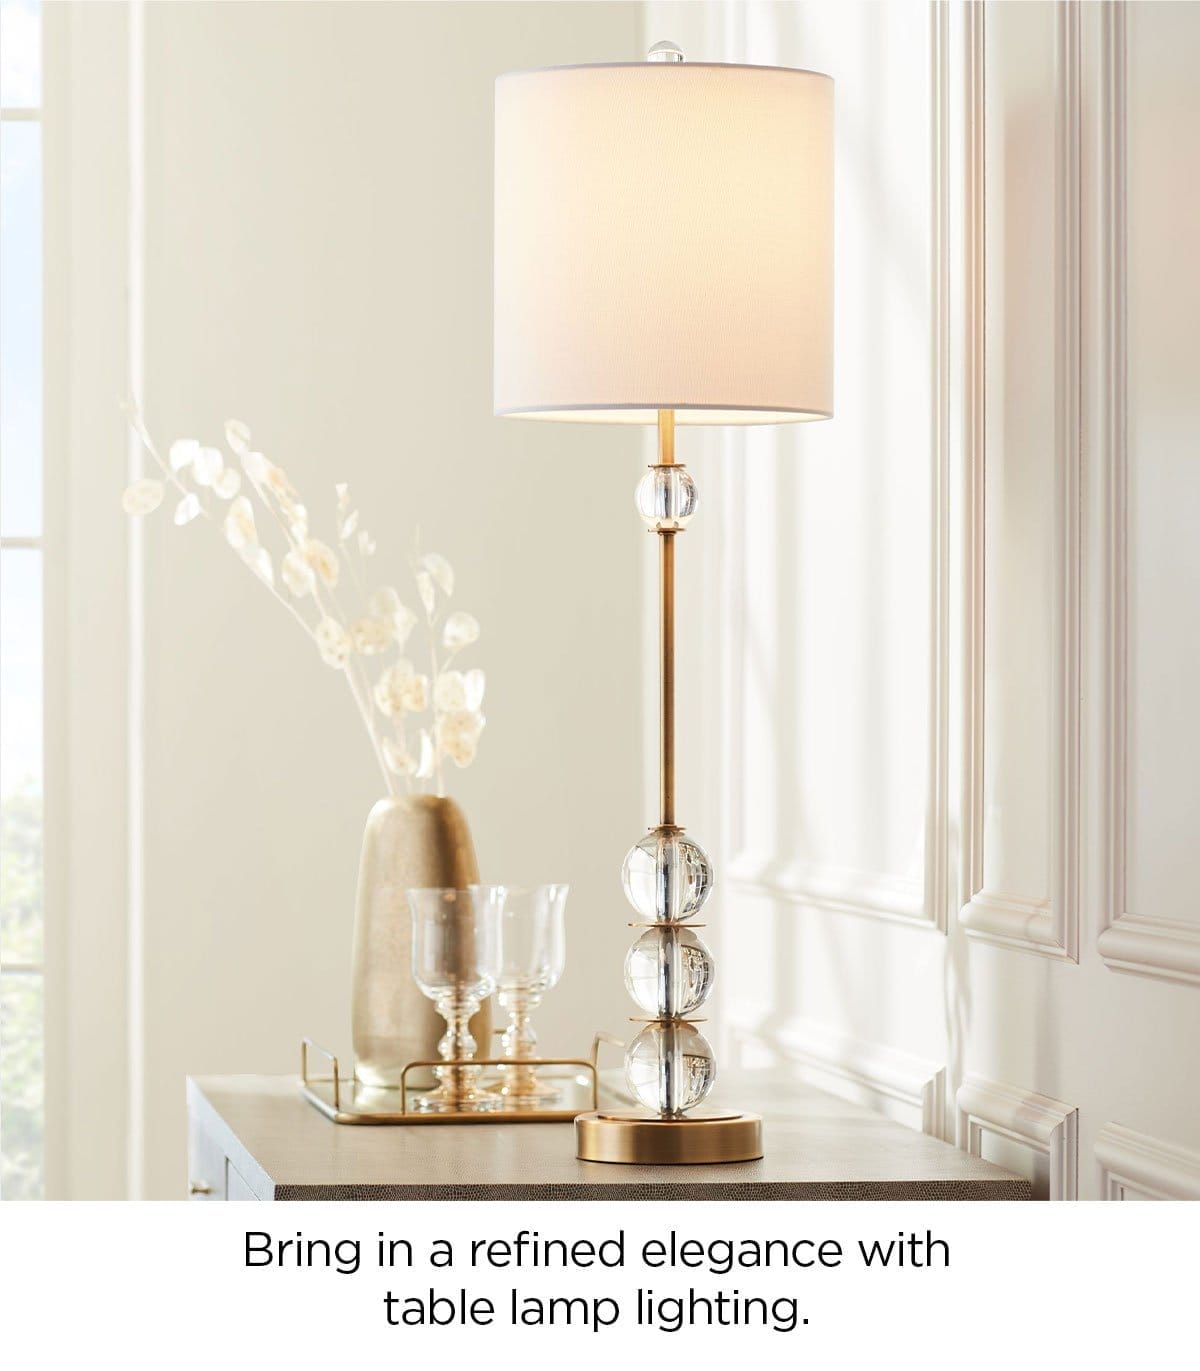 Bring in a refined elegance with table lamp lighting.